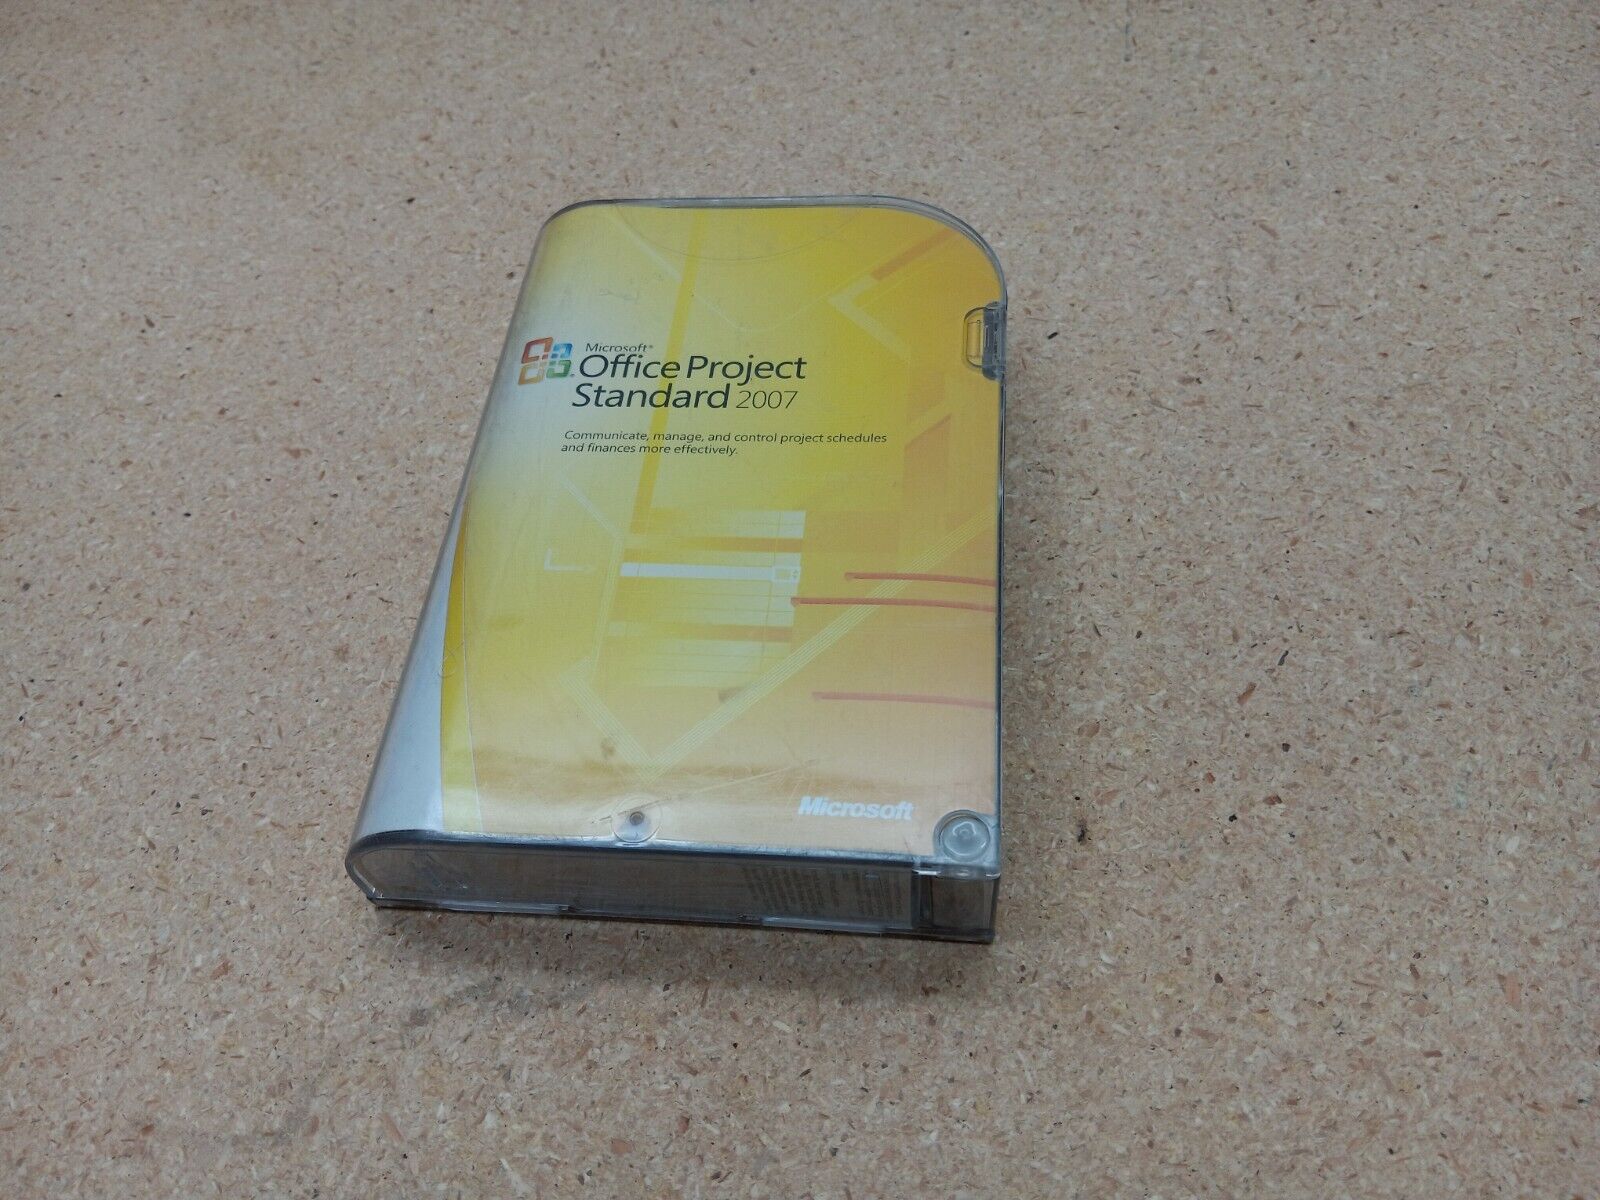 Genuine Microsoft Office Project Standard 2007 with product key